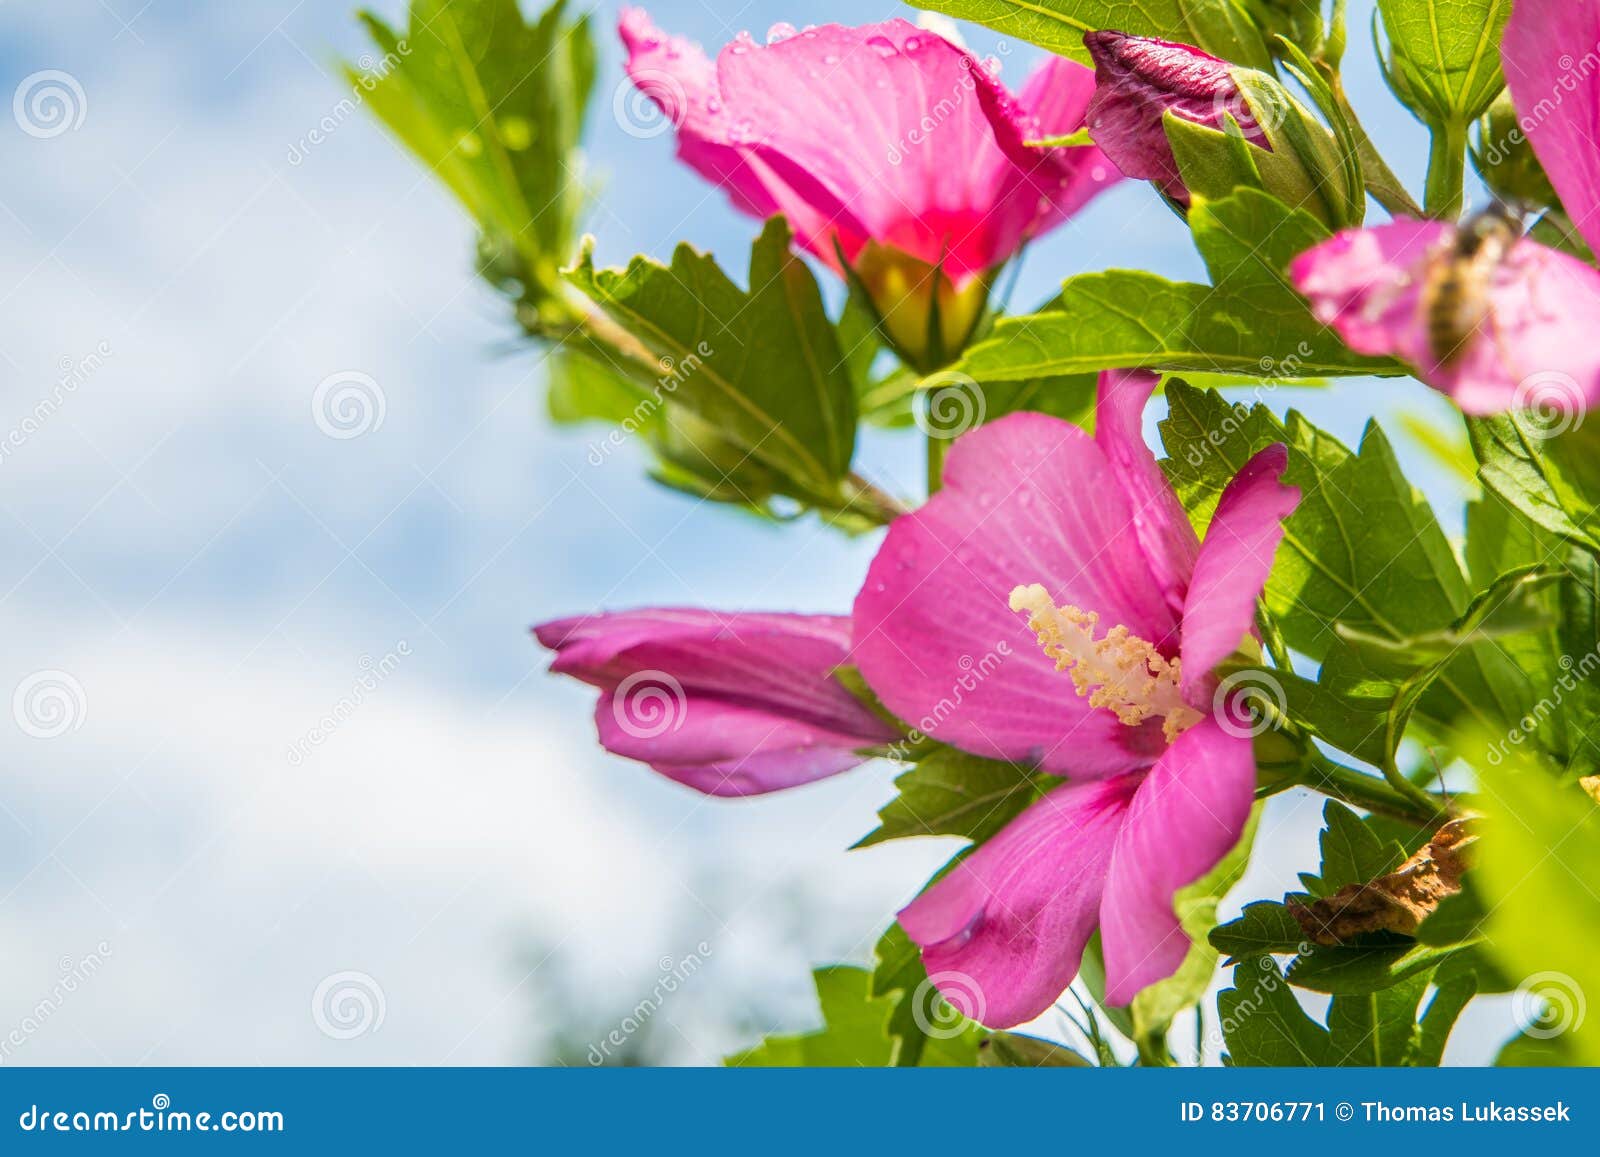 close up of a rose mallow